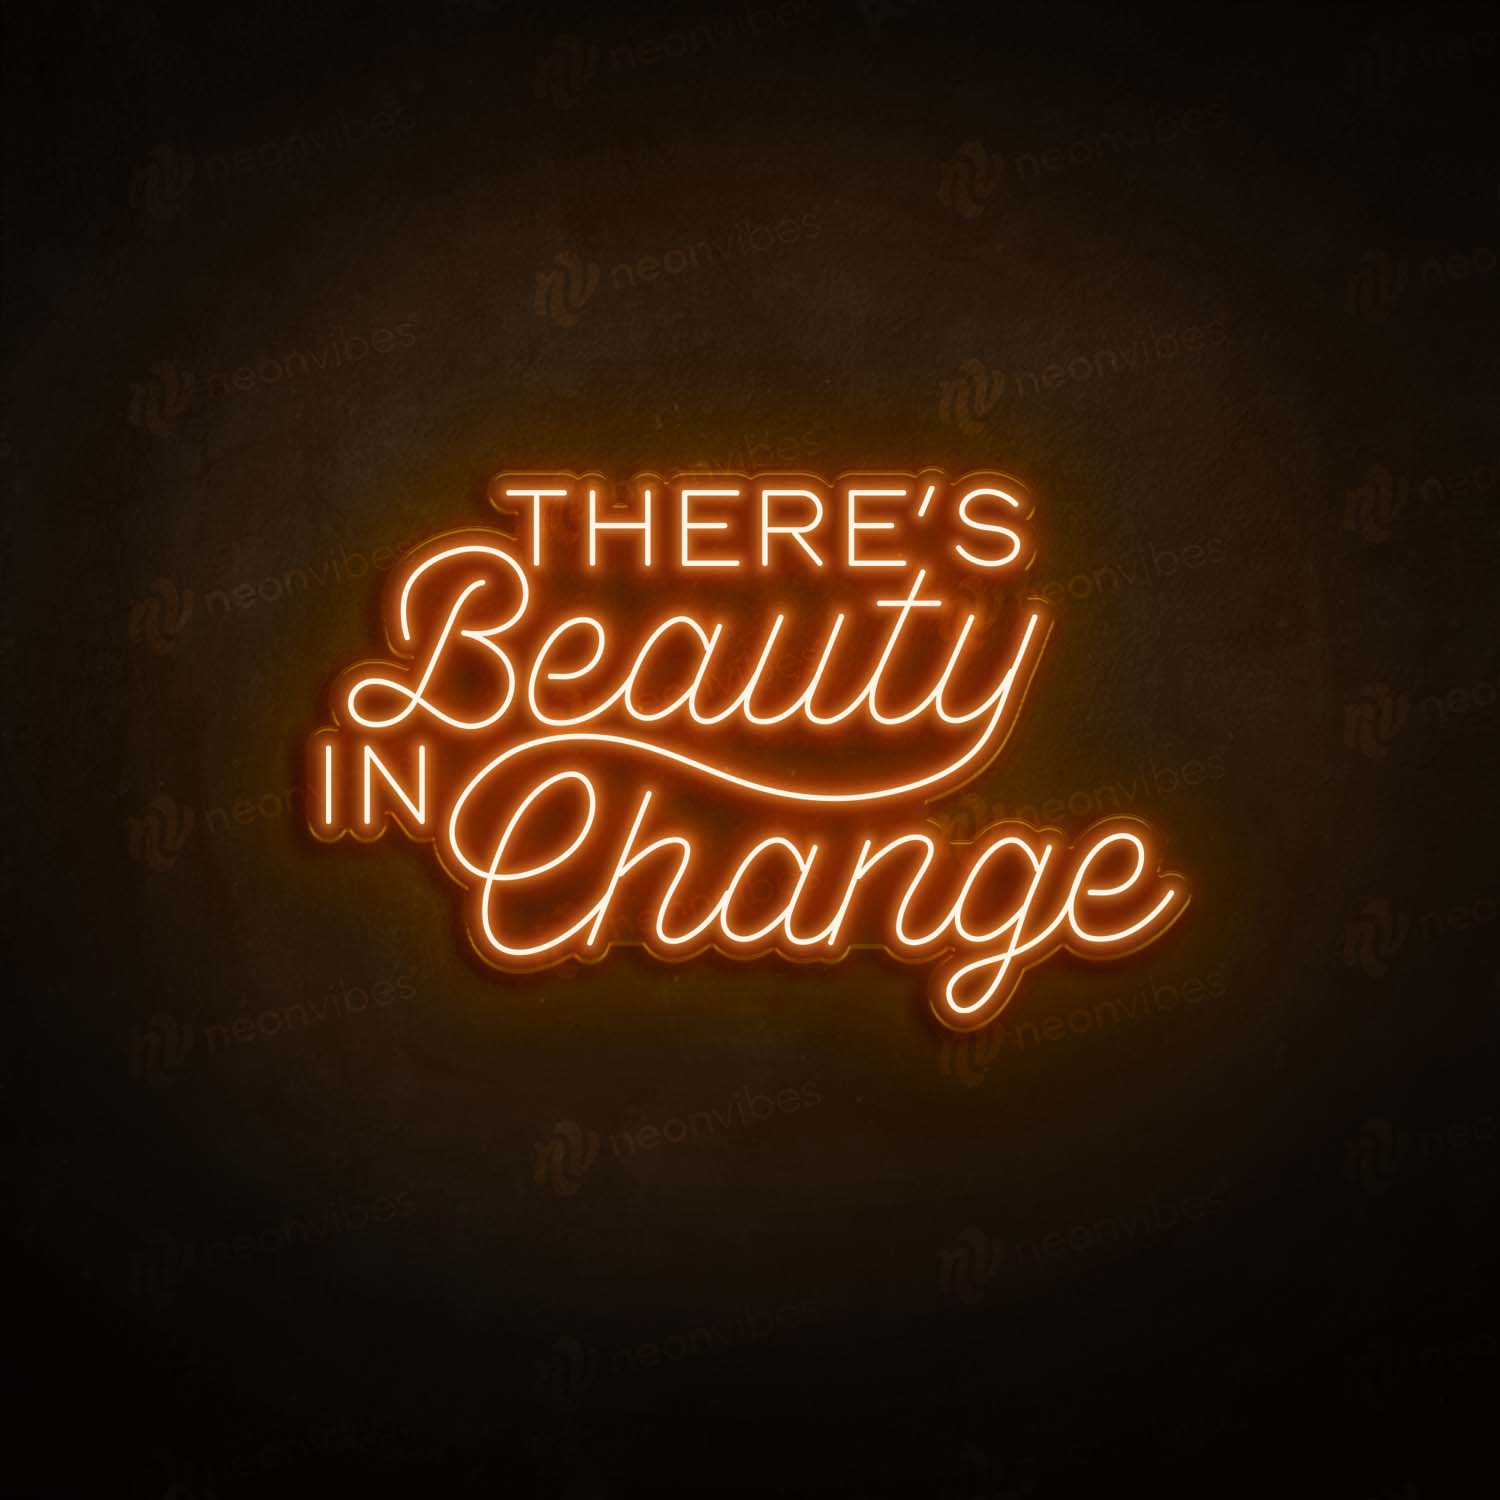 Theres beauty in change neon sign